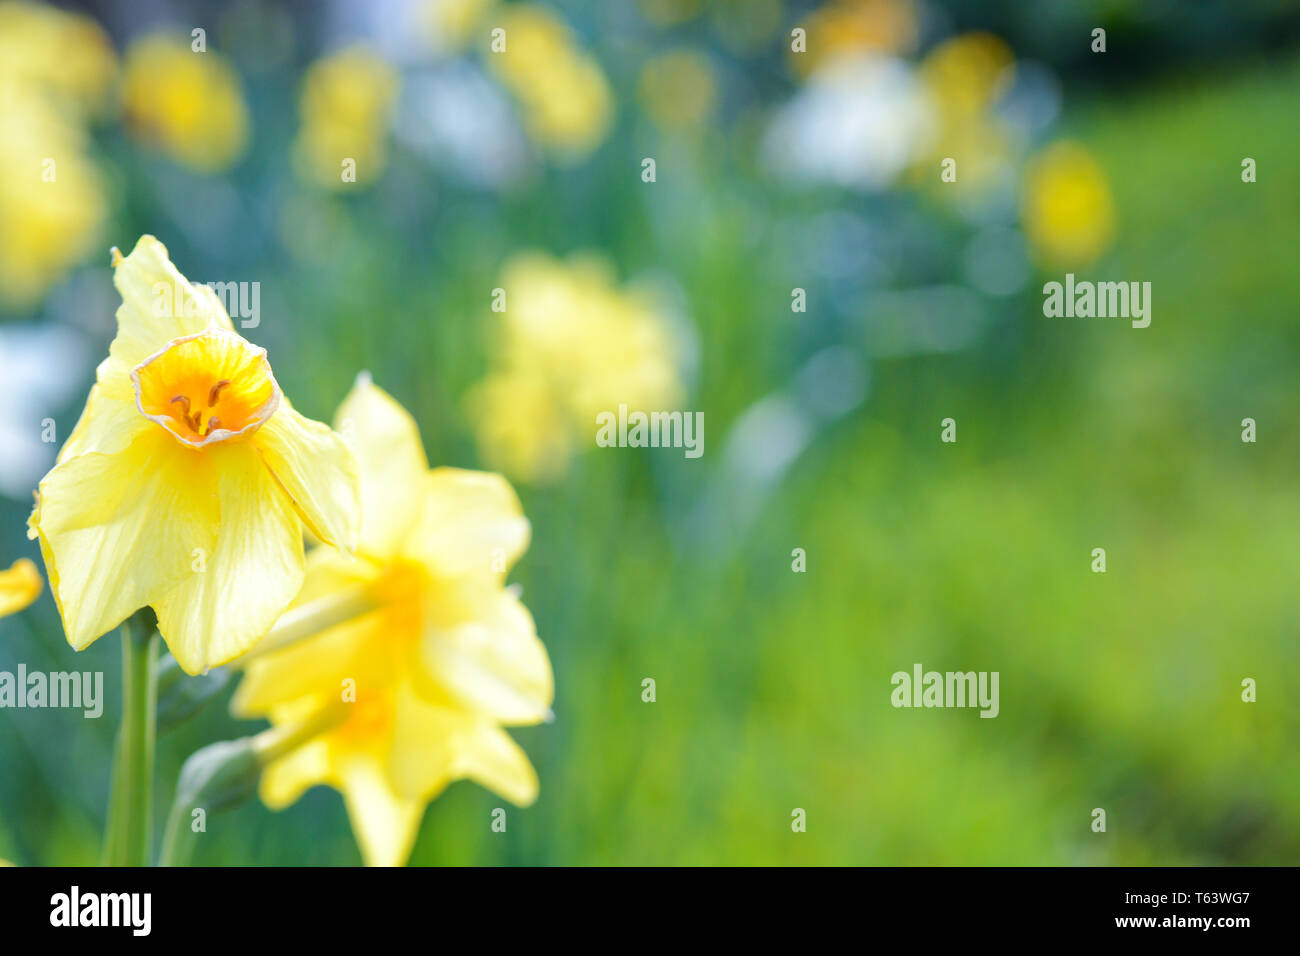 Springtime flowers growing outside with grass background Stock Photo